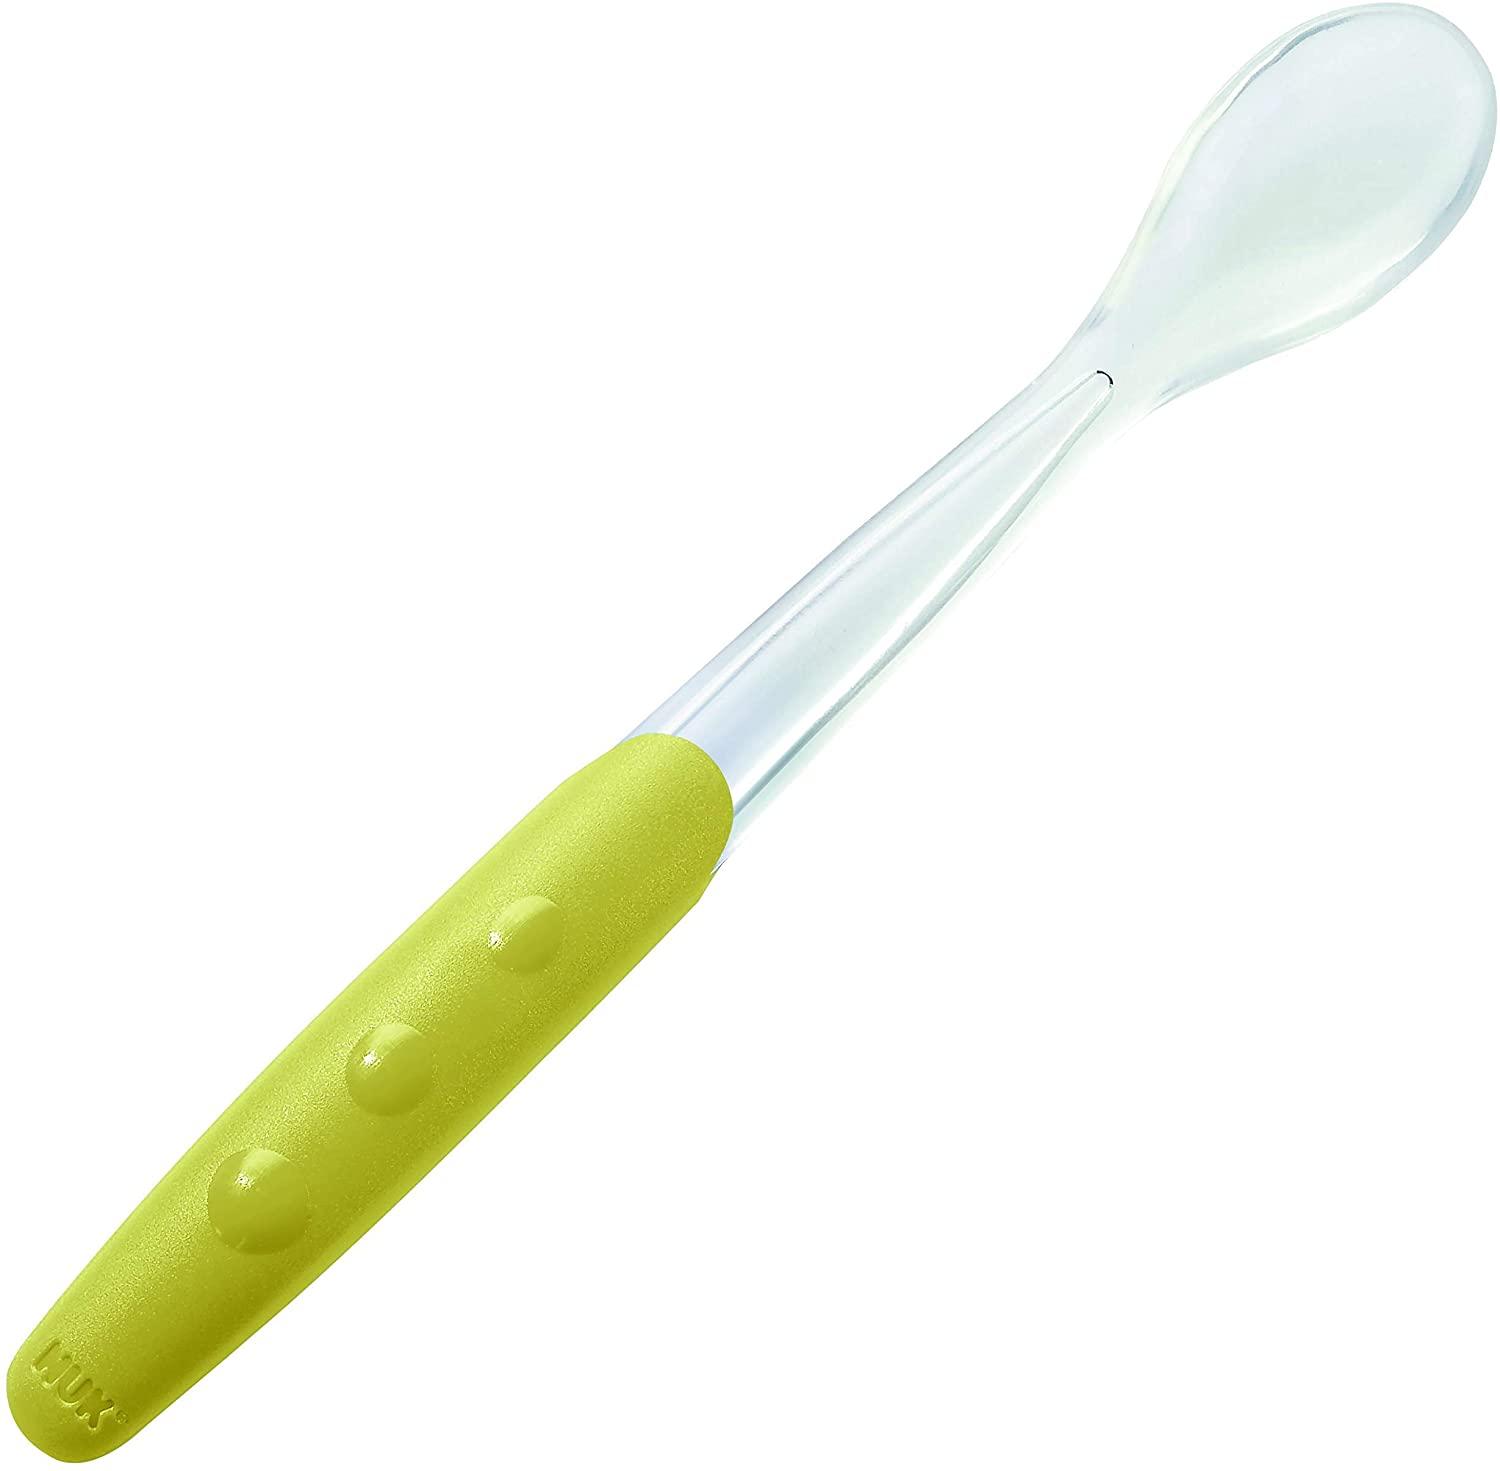 Nuk Easy Learning Soft Spoon 2Pcs Pack - Any One (7007)